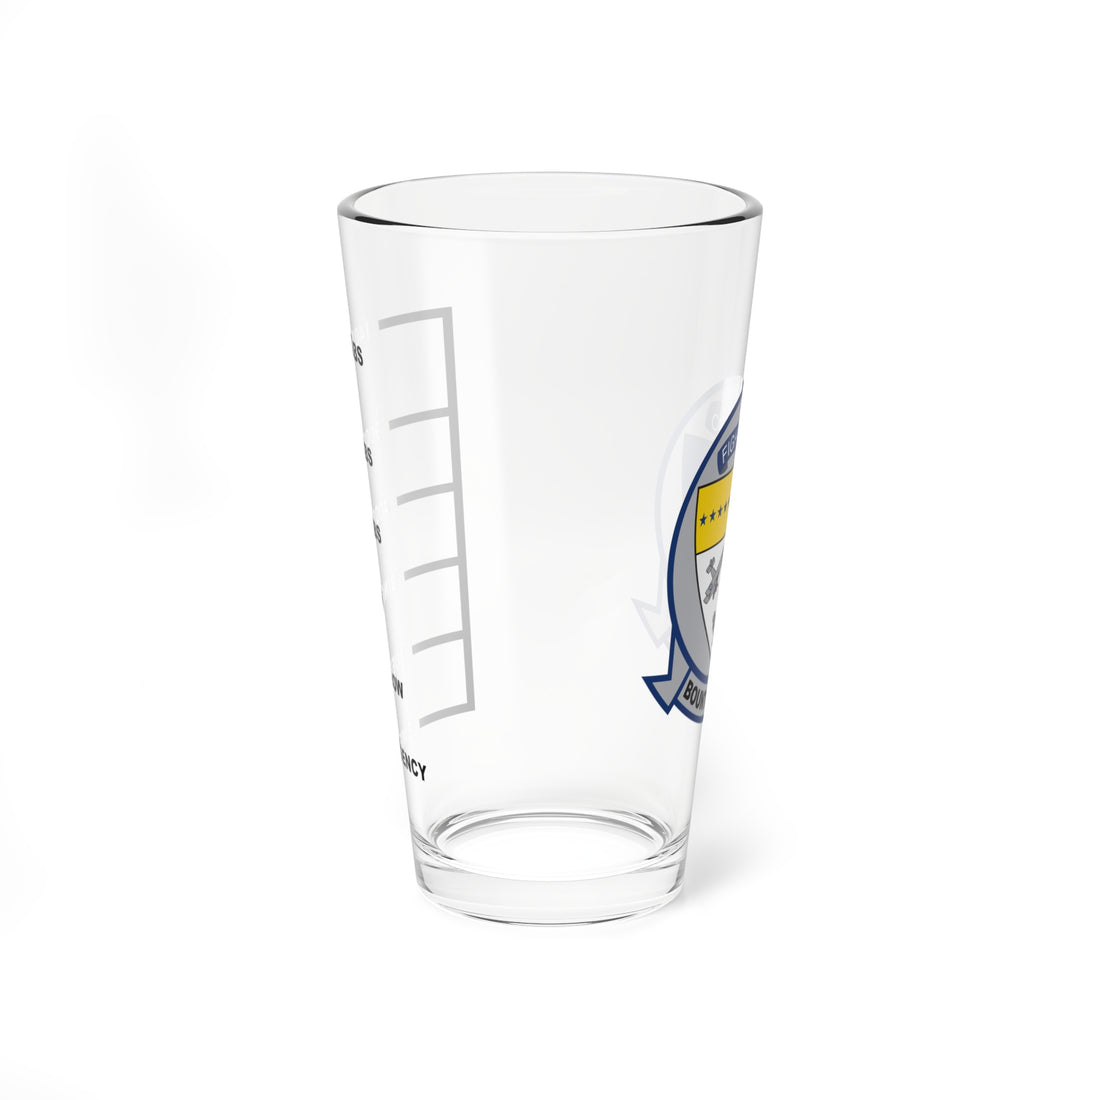 VFA-2 "Bounty Hunters" Fuel Low Pint Glass, Navy Strike Fighter Squadron flying the F/A-18 Hornet